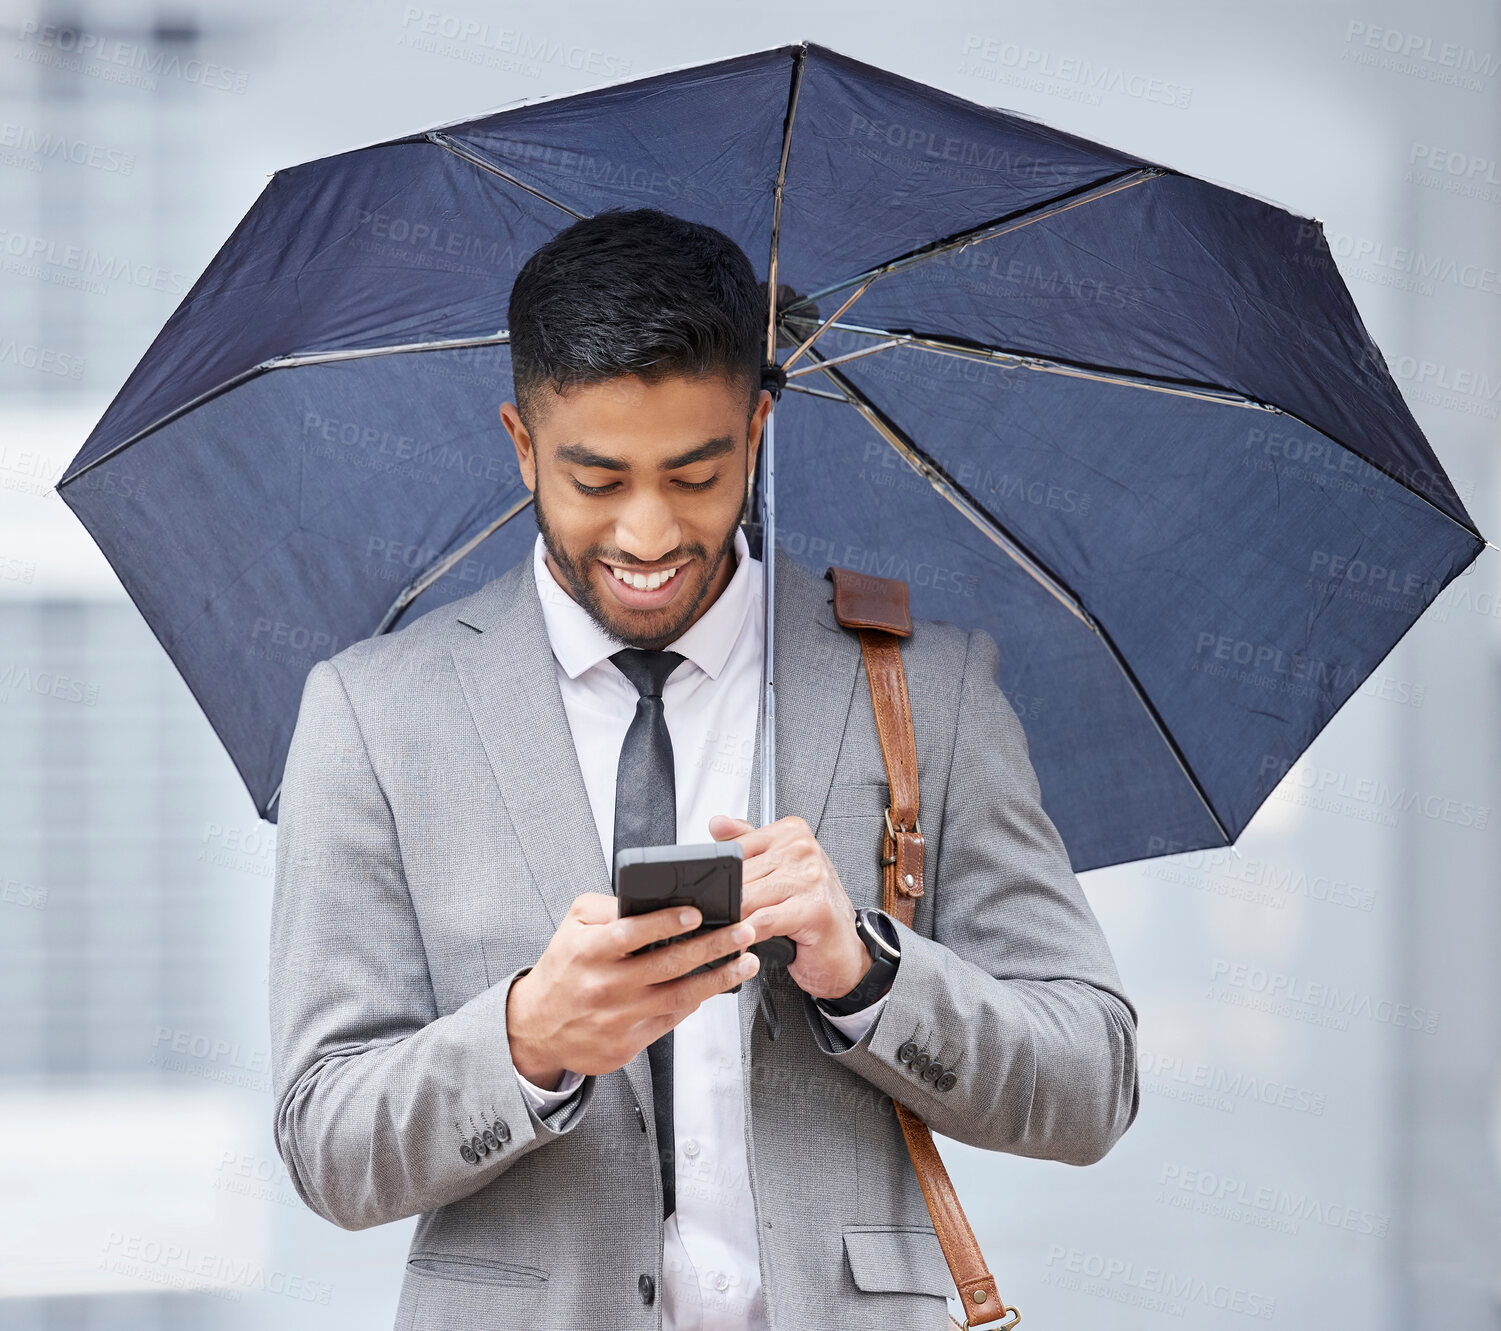 Buy stock photo Shot of a young businessman holding an umbrella while using a cellphone on a rainy day in the city